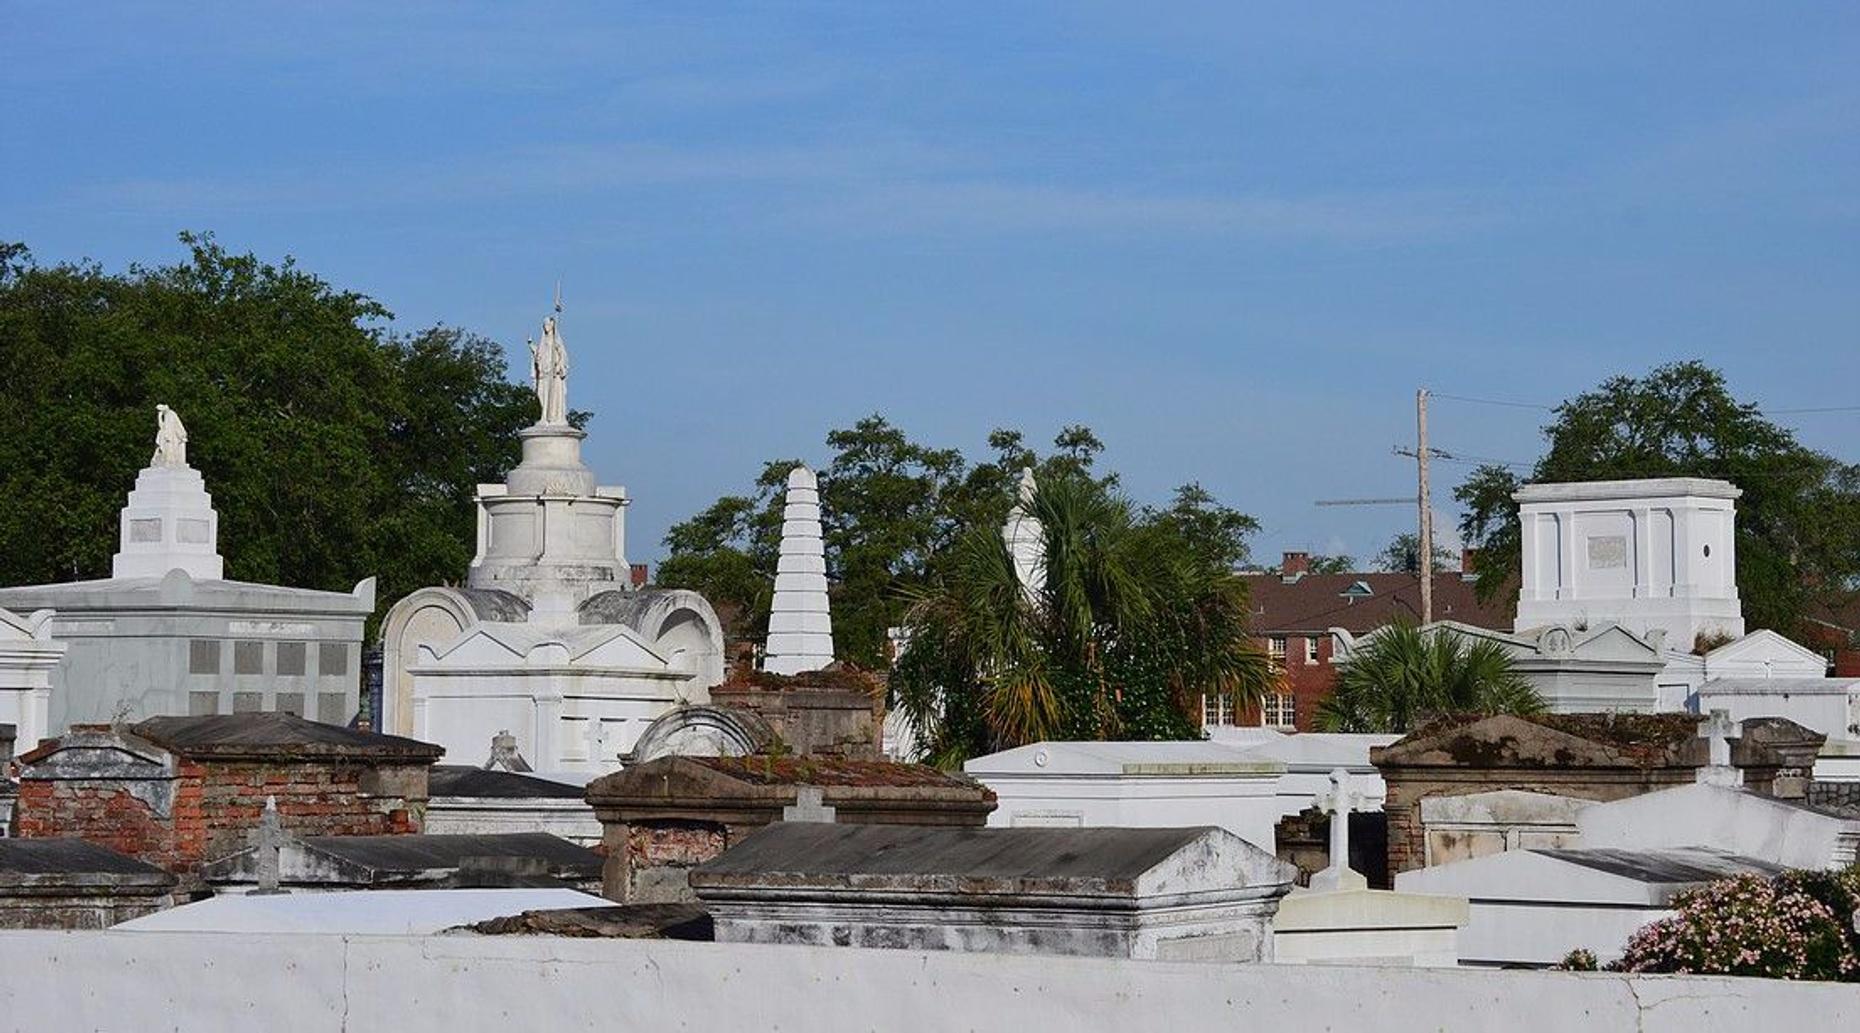 Walking Tour of St. Louis Cemetery in New Orleans